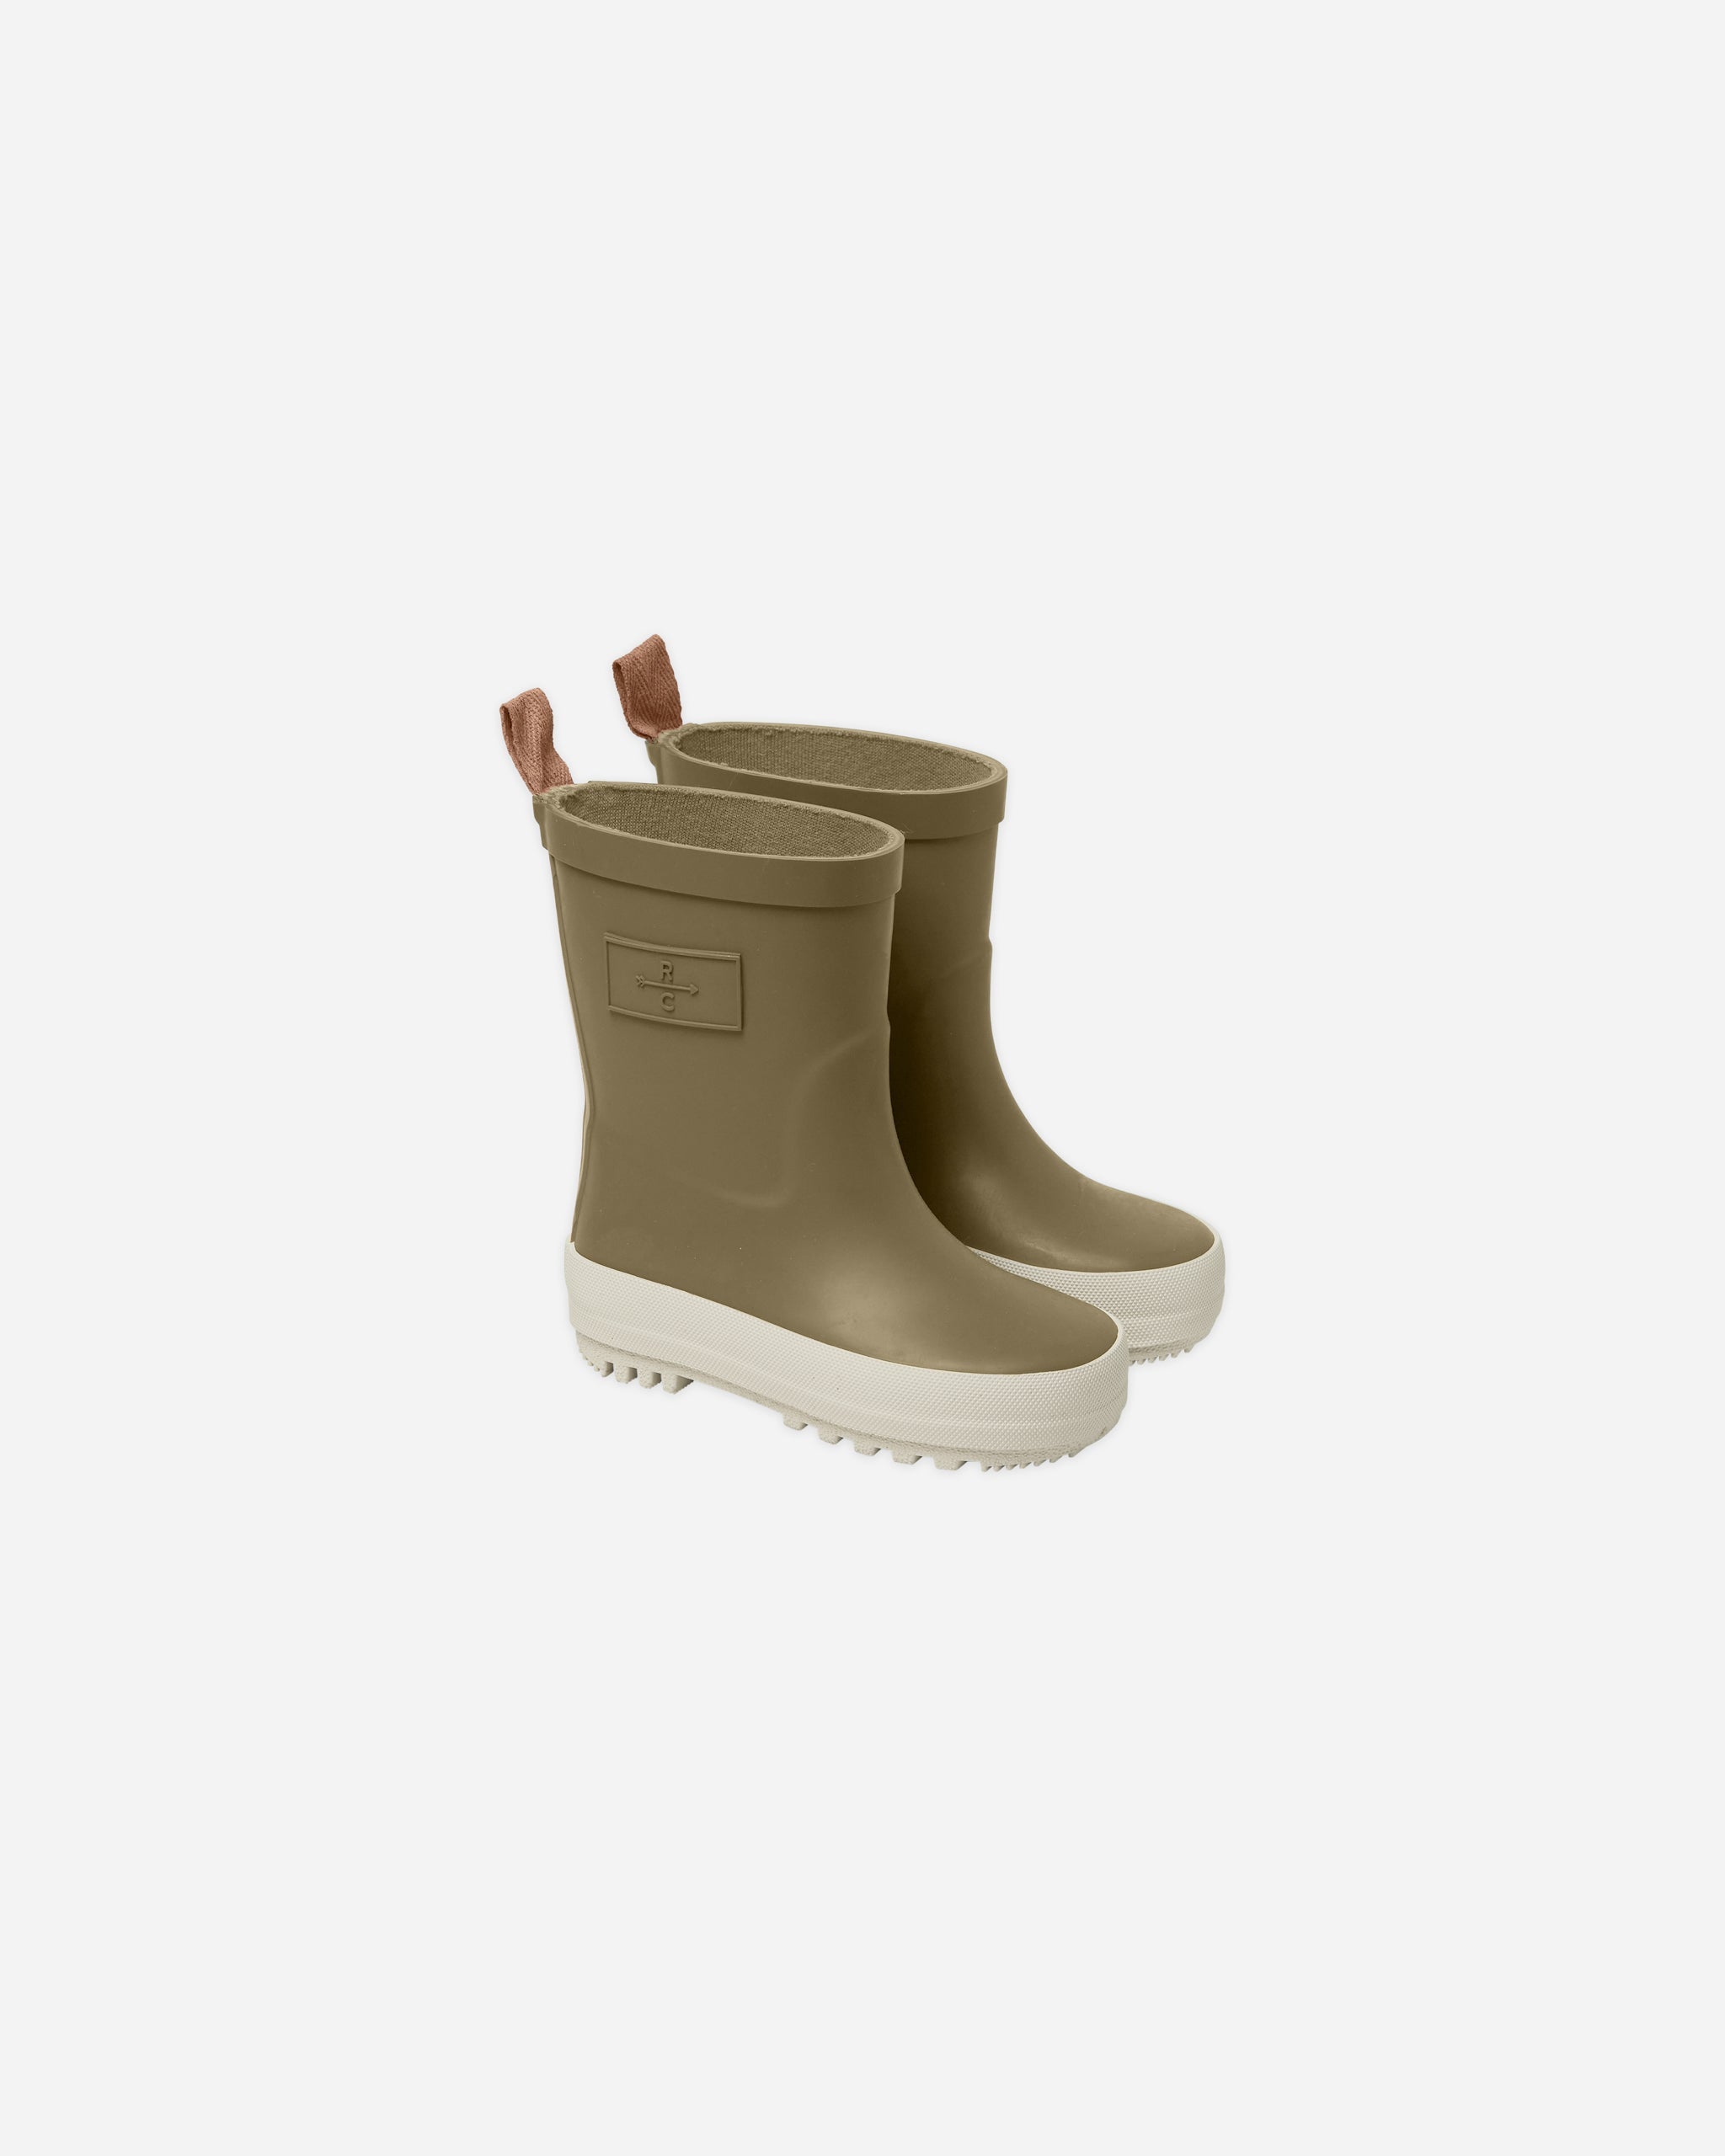 Rainboot || Moss - Rylee + Cru | Kids Clothes | Trendy Baby Clothes | Modern Infant Outfits |